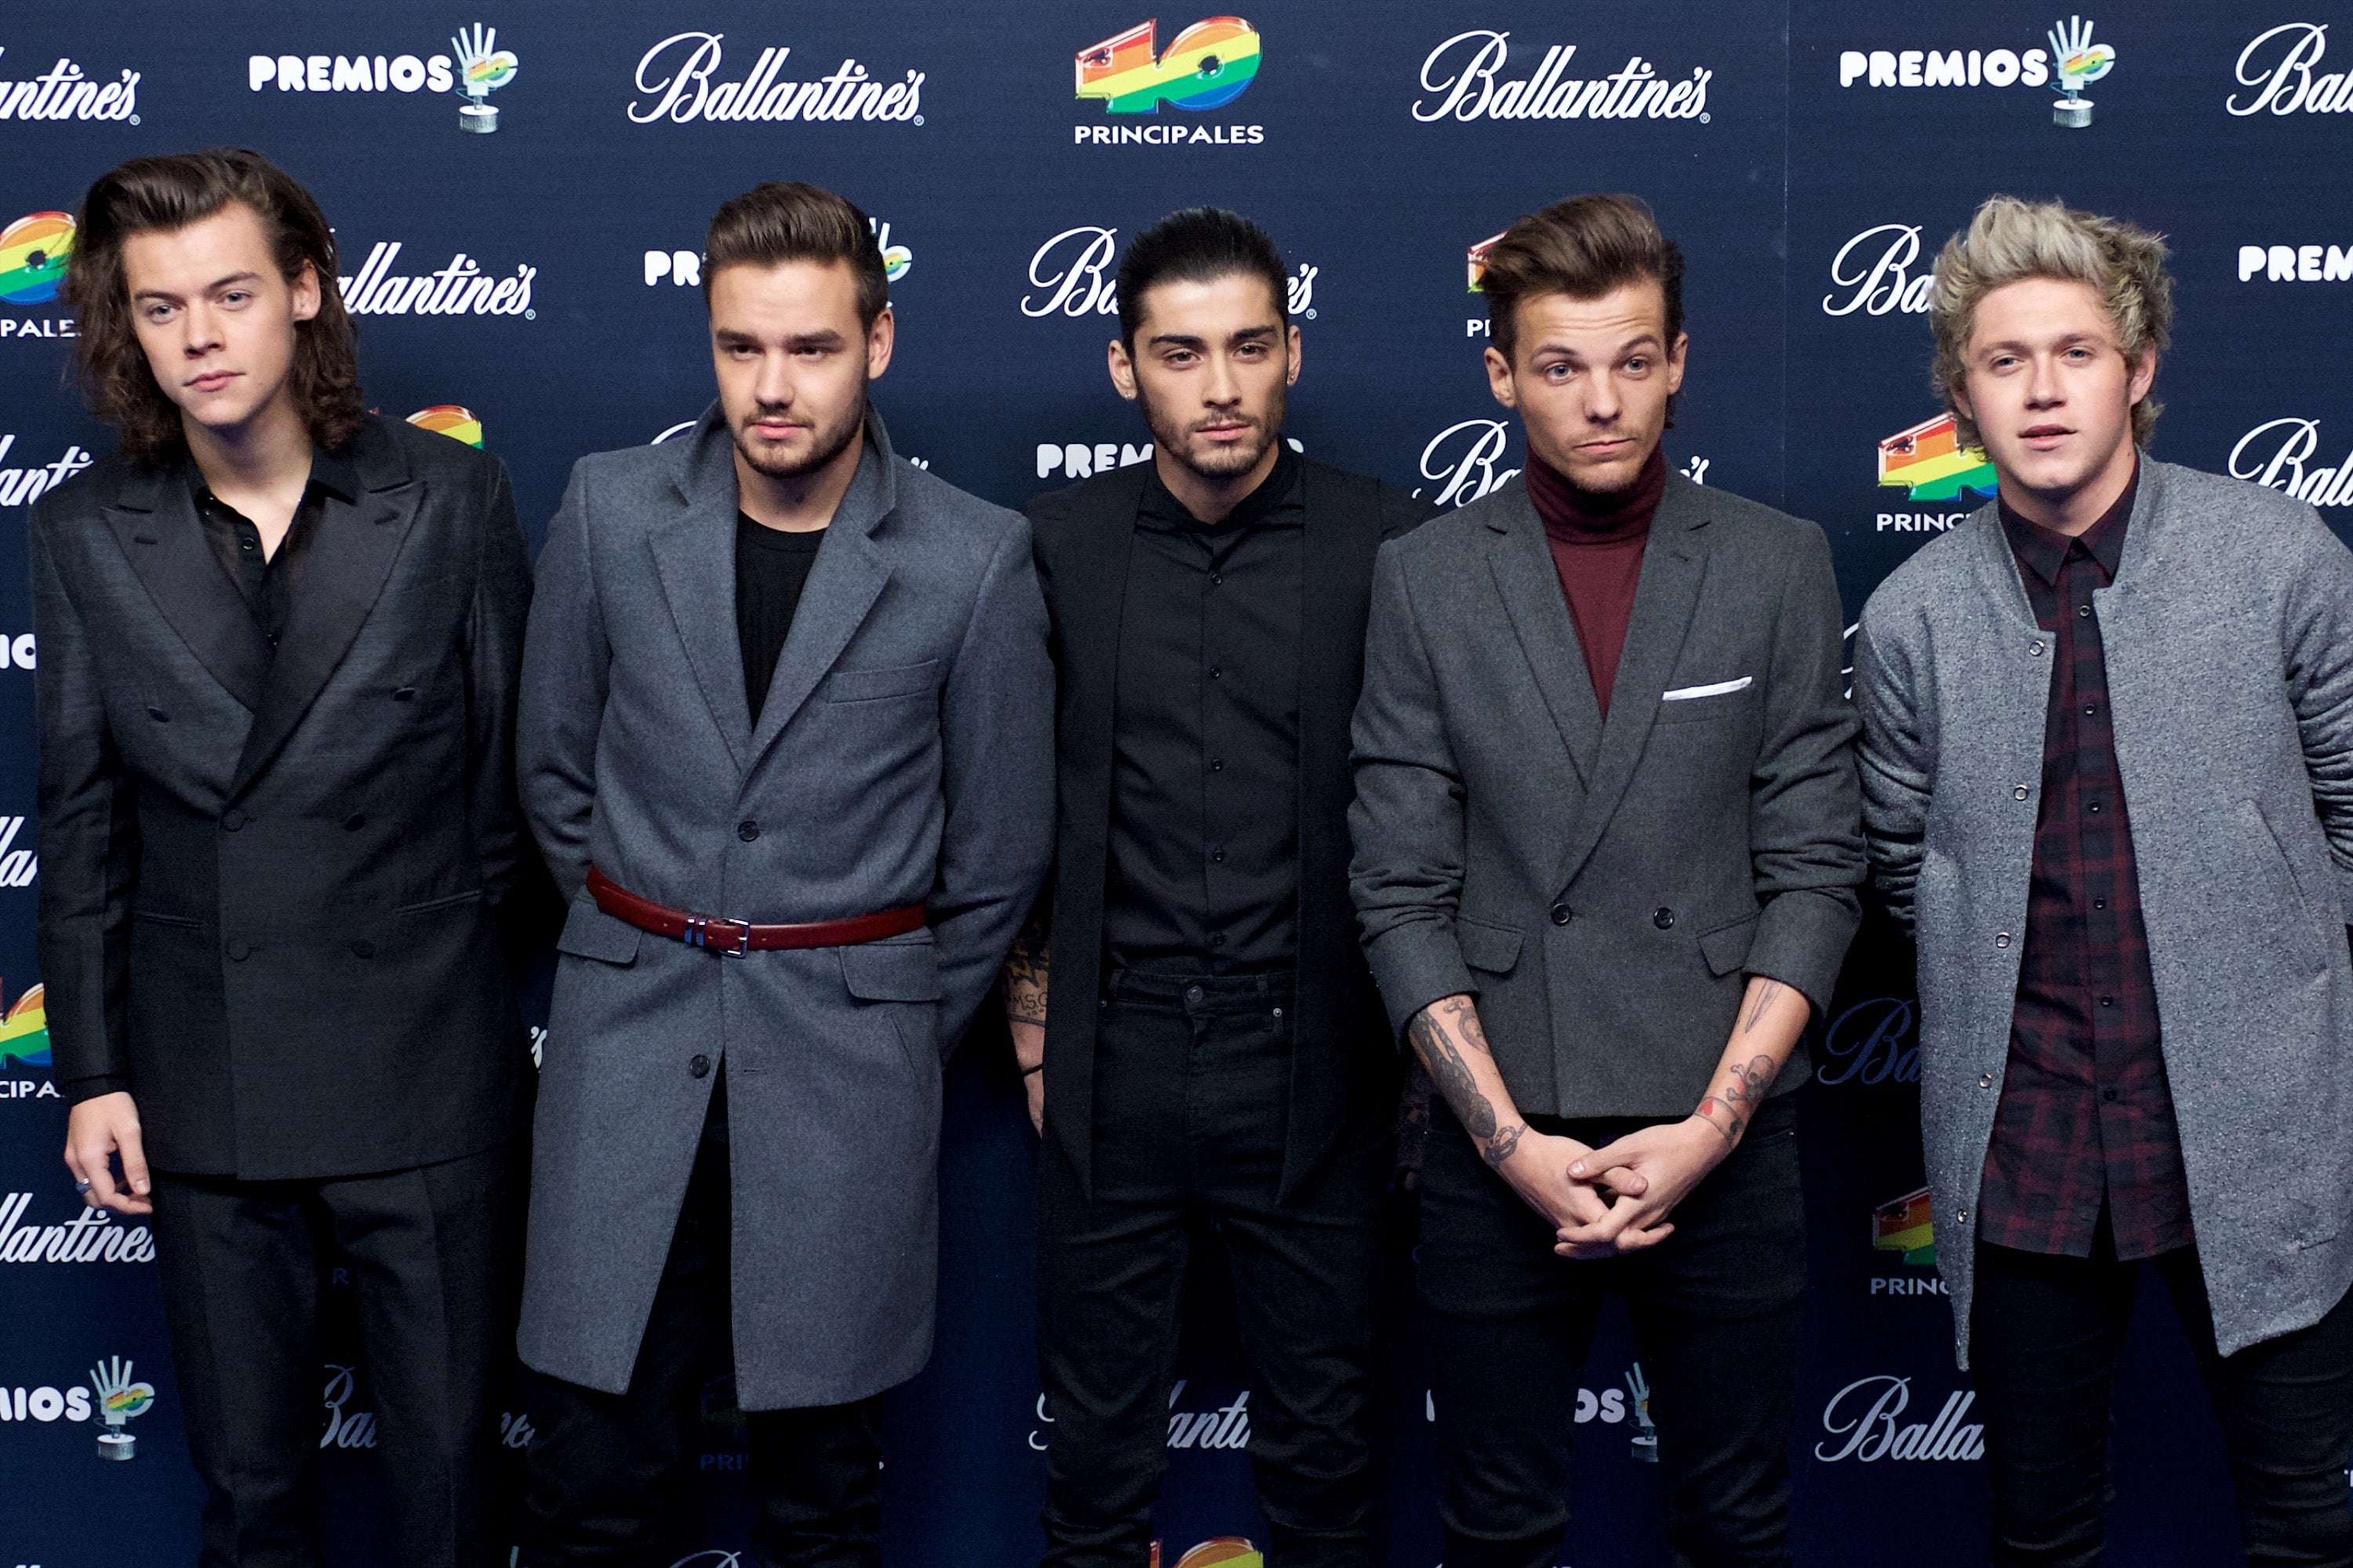 (L-R) Harry Styles, Liam Payne, Zayn Malik, Louis Tomlinson and Niall Horan of One Direction attend the 40 Principales Awards 2014 photocall at the Barclaycard Center in 2014